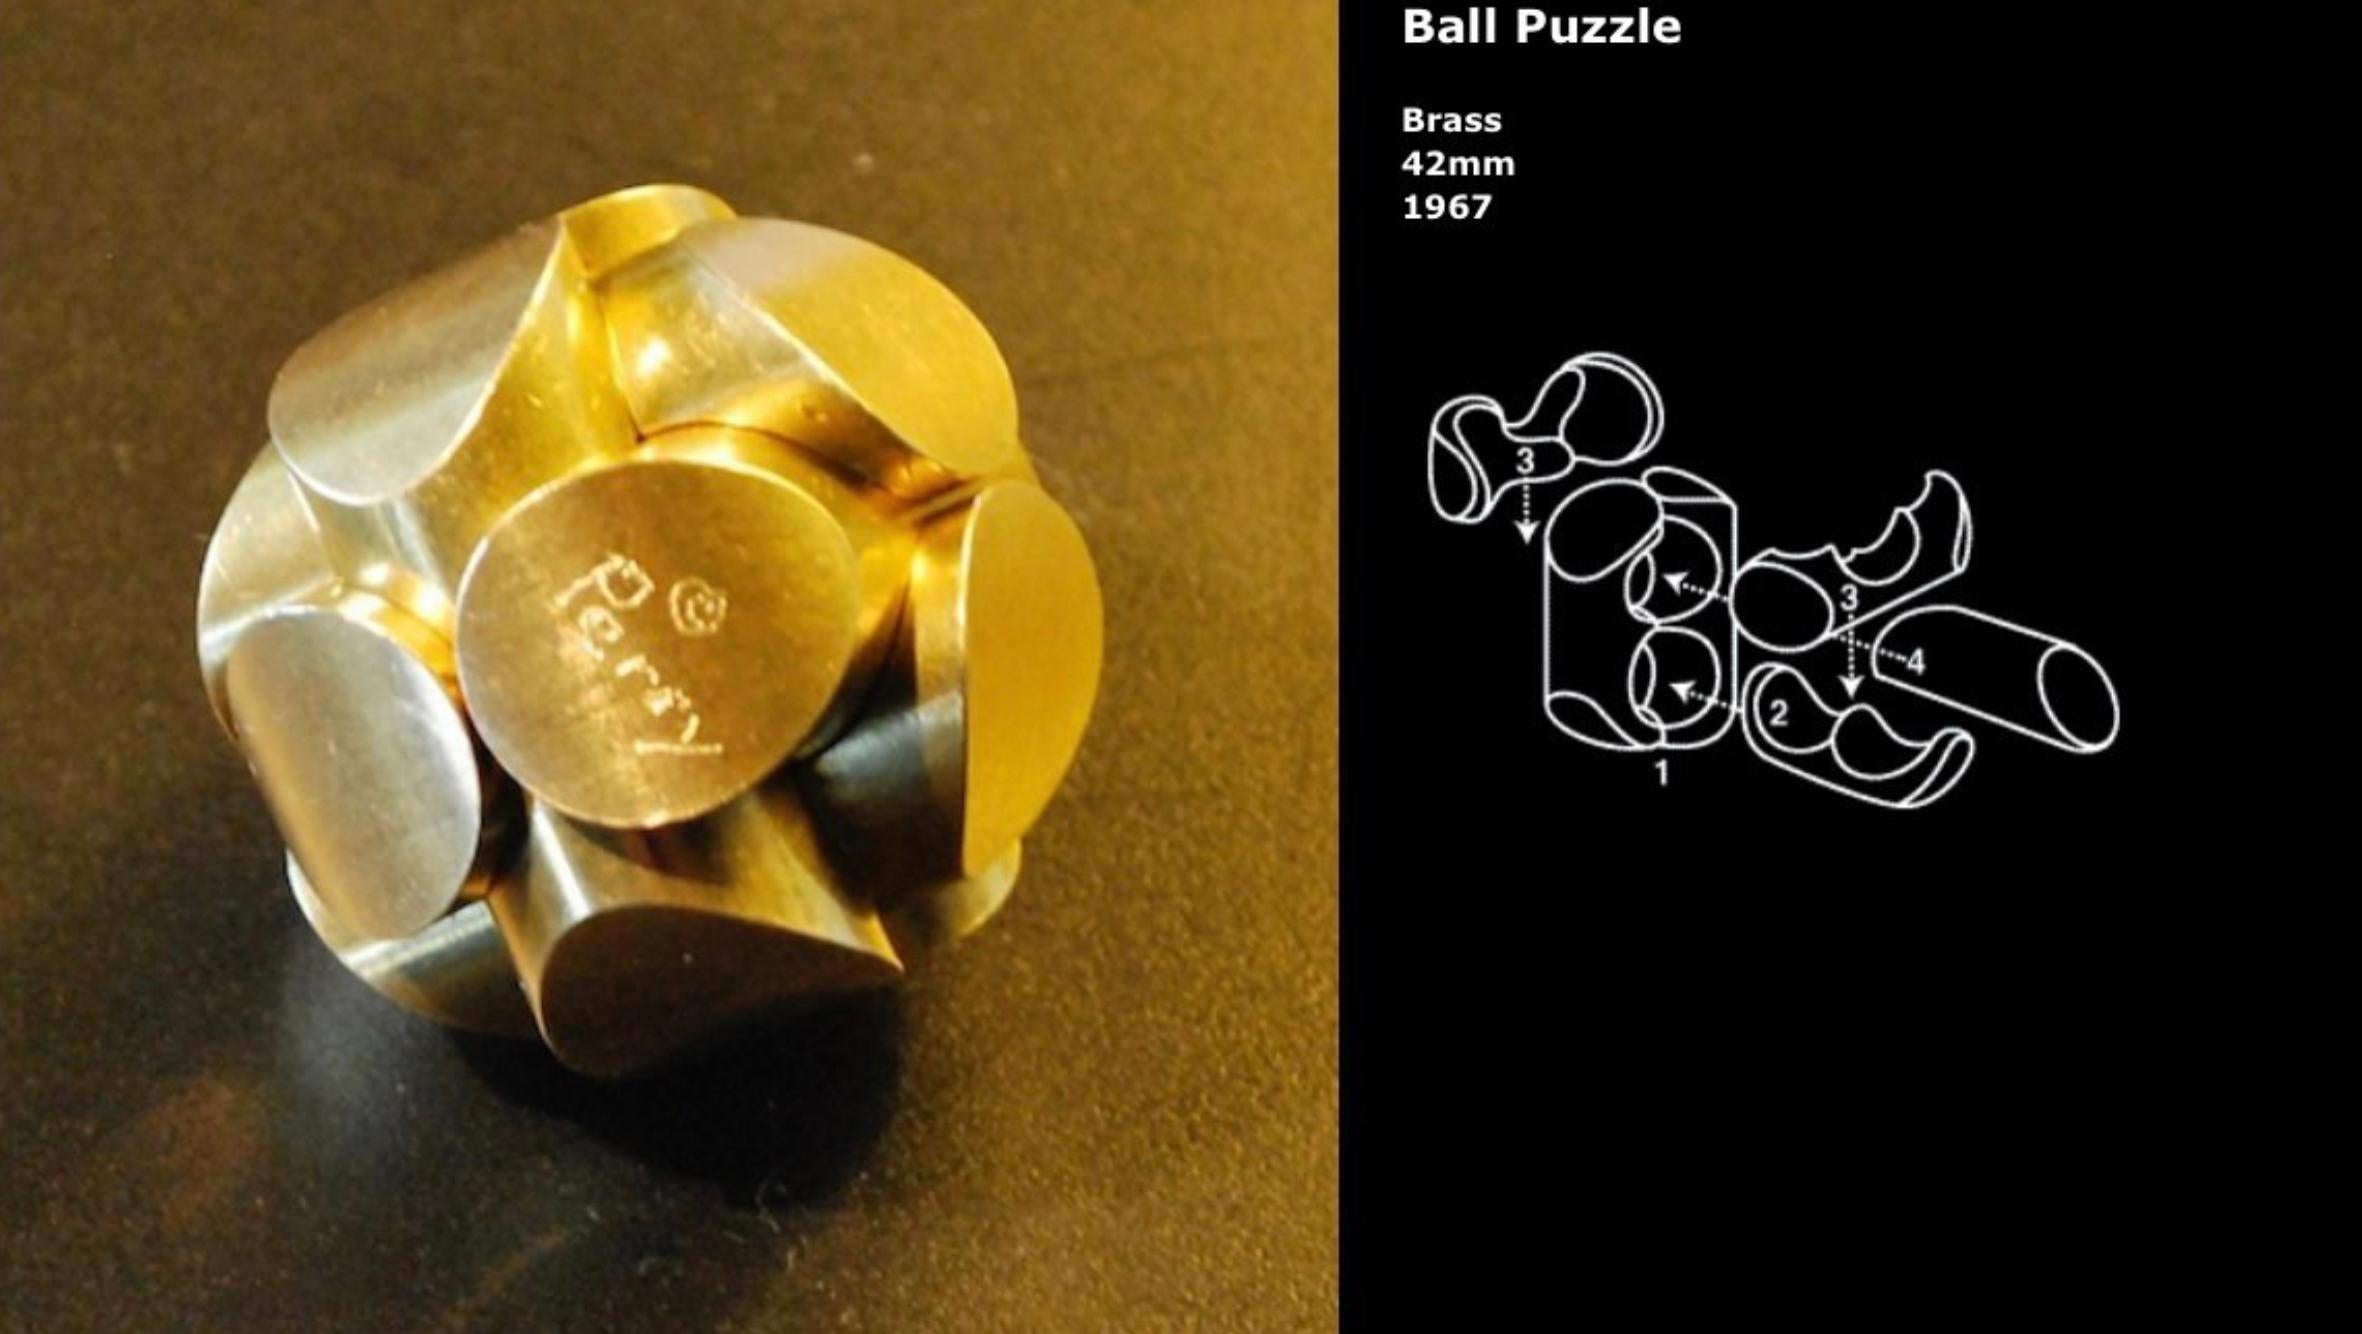 Italian “Ball Puzzle” Sculpture by Charles Owen Perry